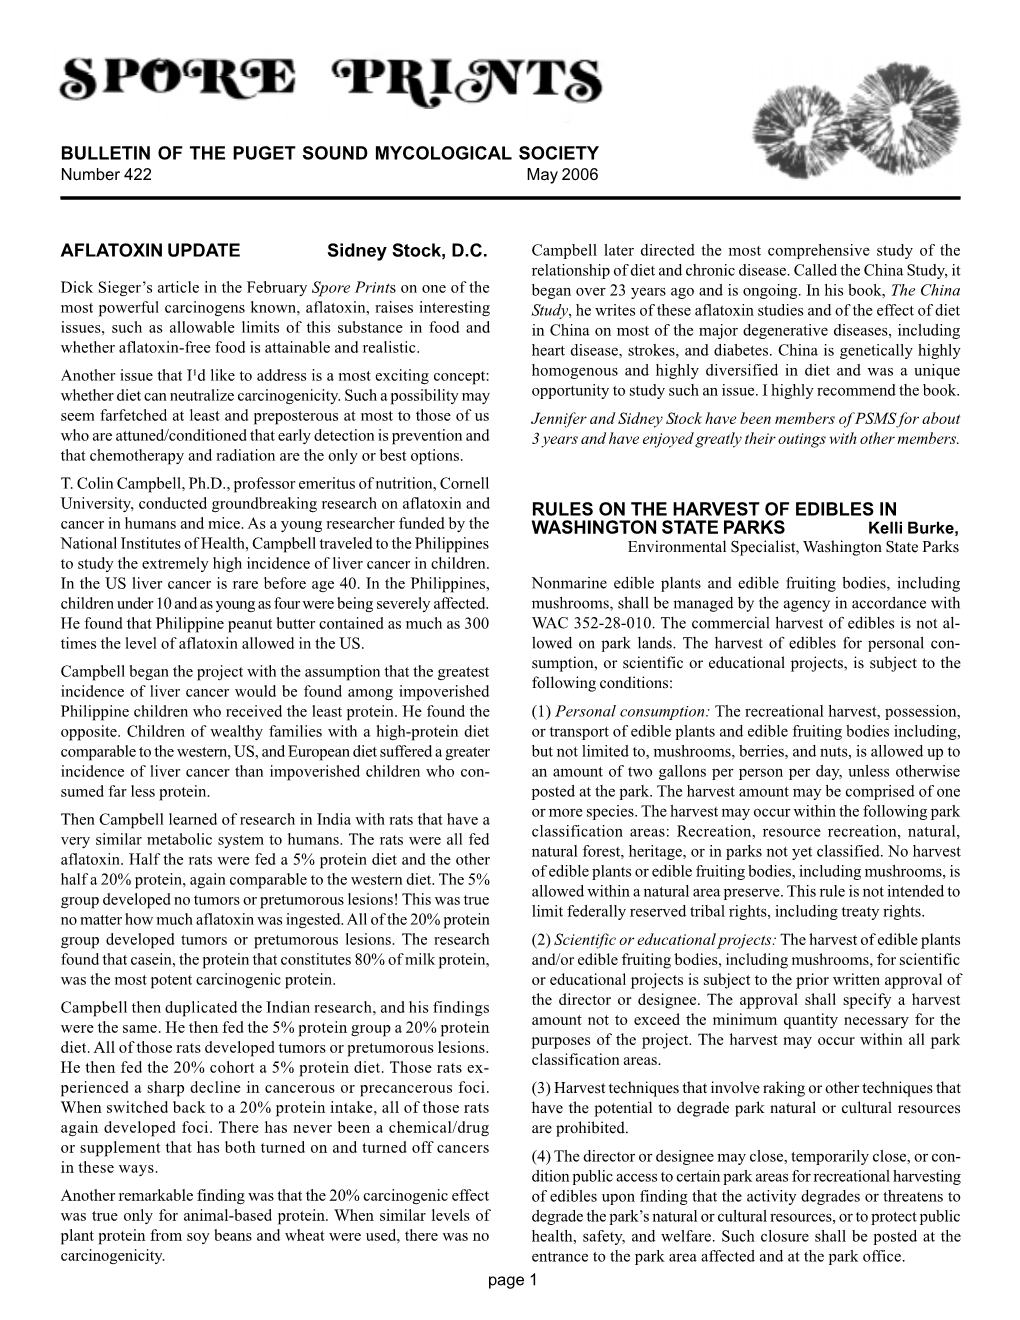 BULLETIN of the PUGET SOUND MYCOLOGICAL SOCIETY Number 422 May 2006